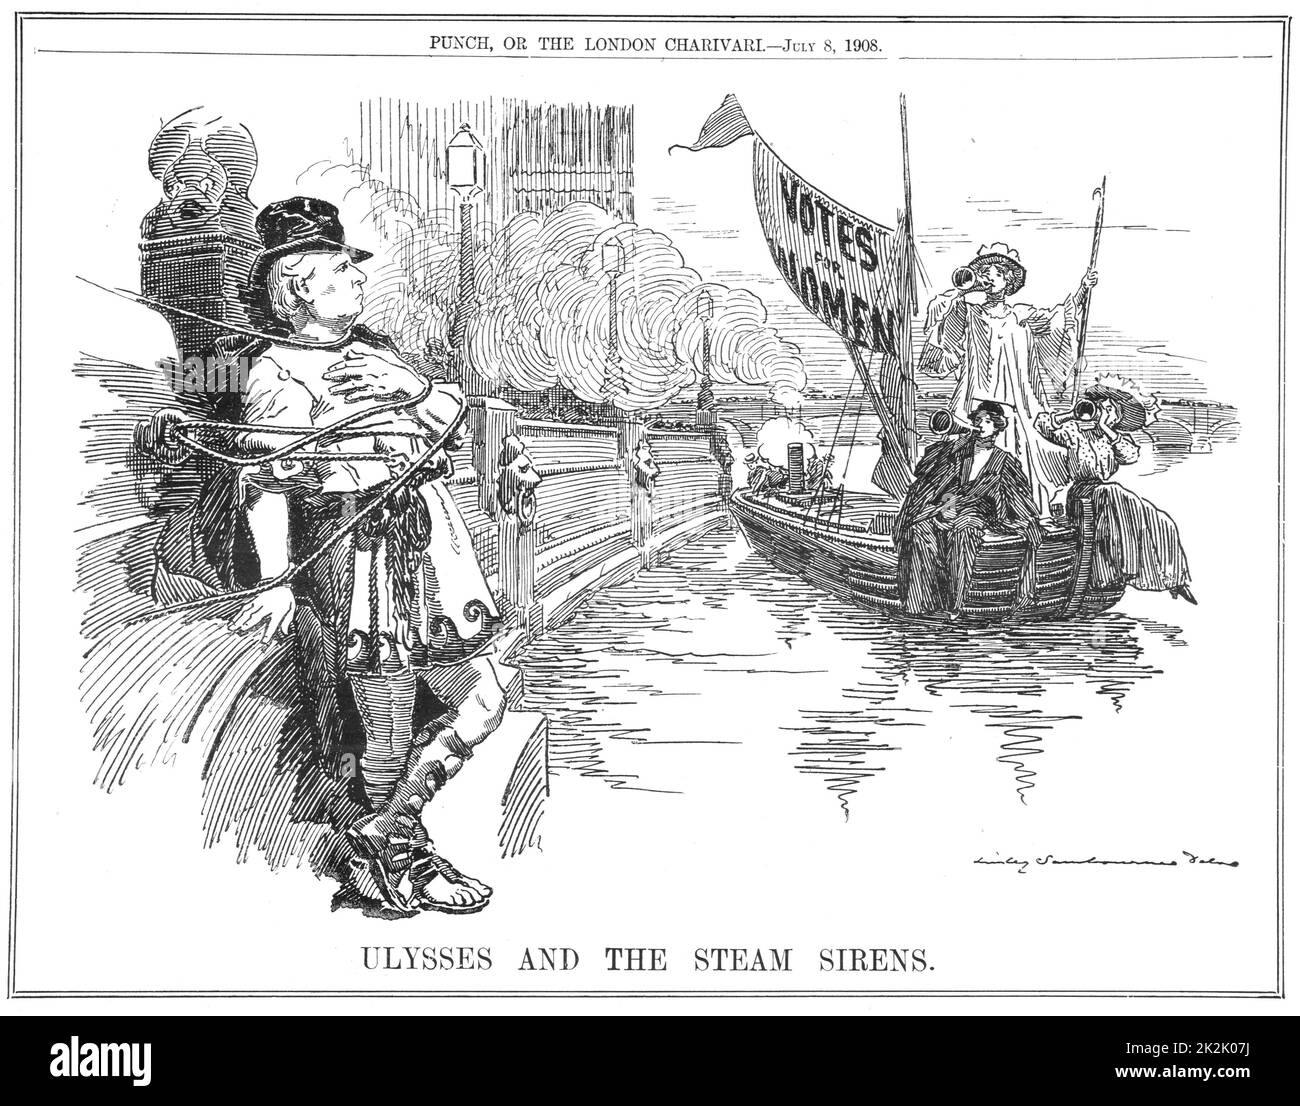 The British Prime Minister, Herbert Asquith, lashing himself to the Embankment at Westminster to protect himself from the sirens in the steamboat calling for Votes for Women.  Cartoon by Edward Linley Sambourne from 'Punch', London, 8 July 1908. Stock Photo